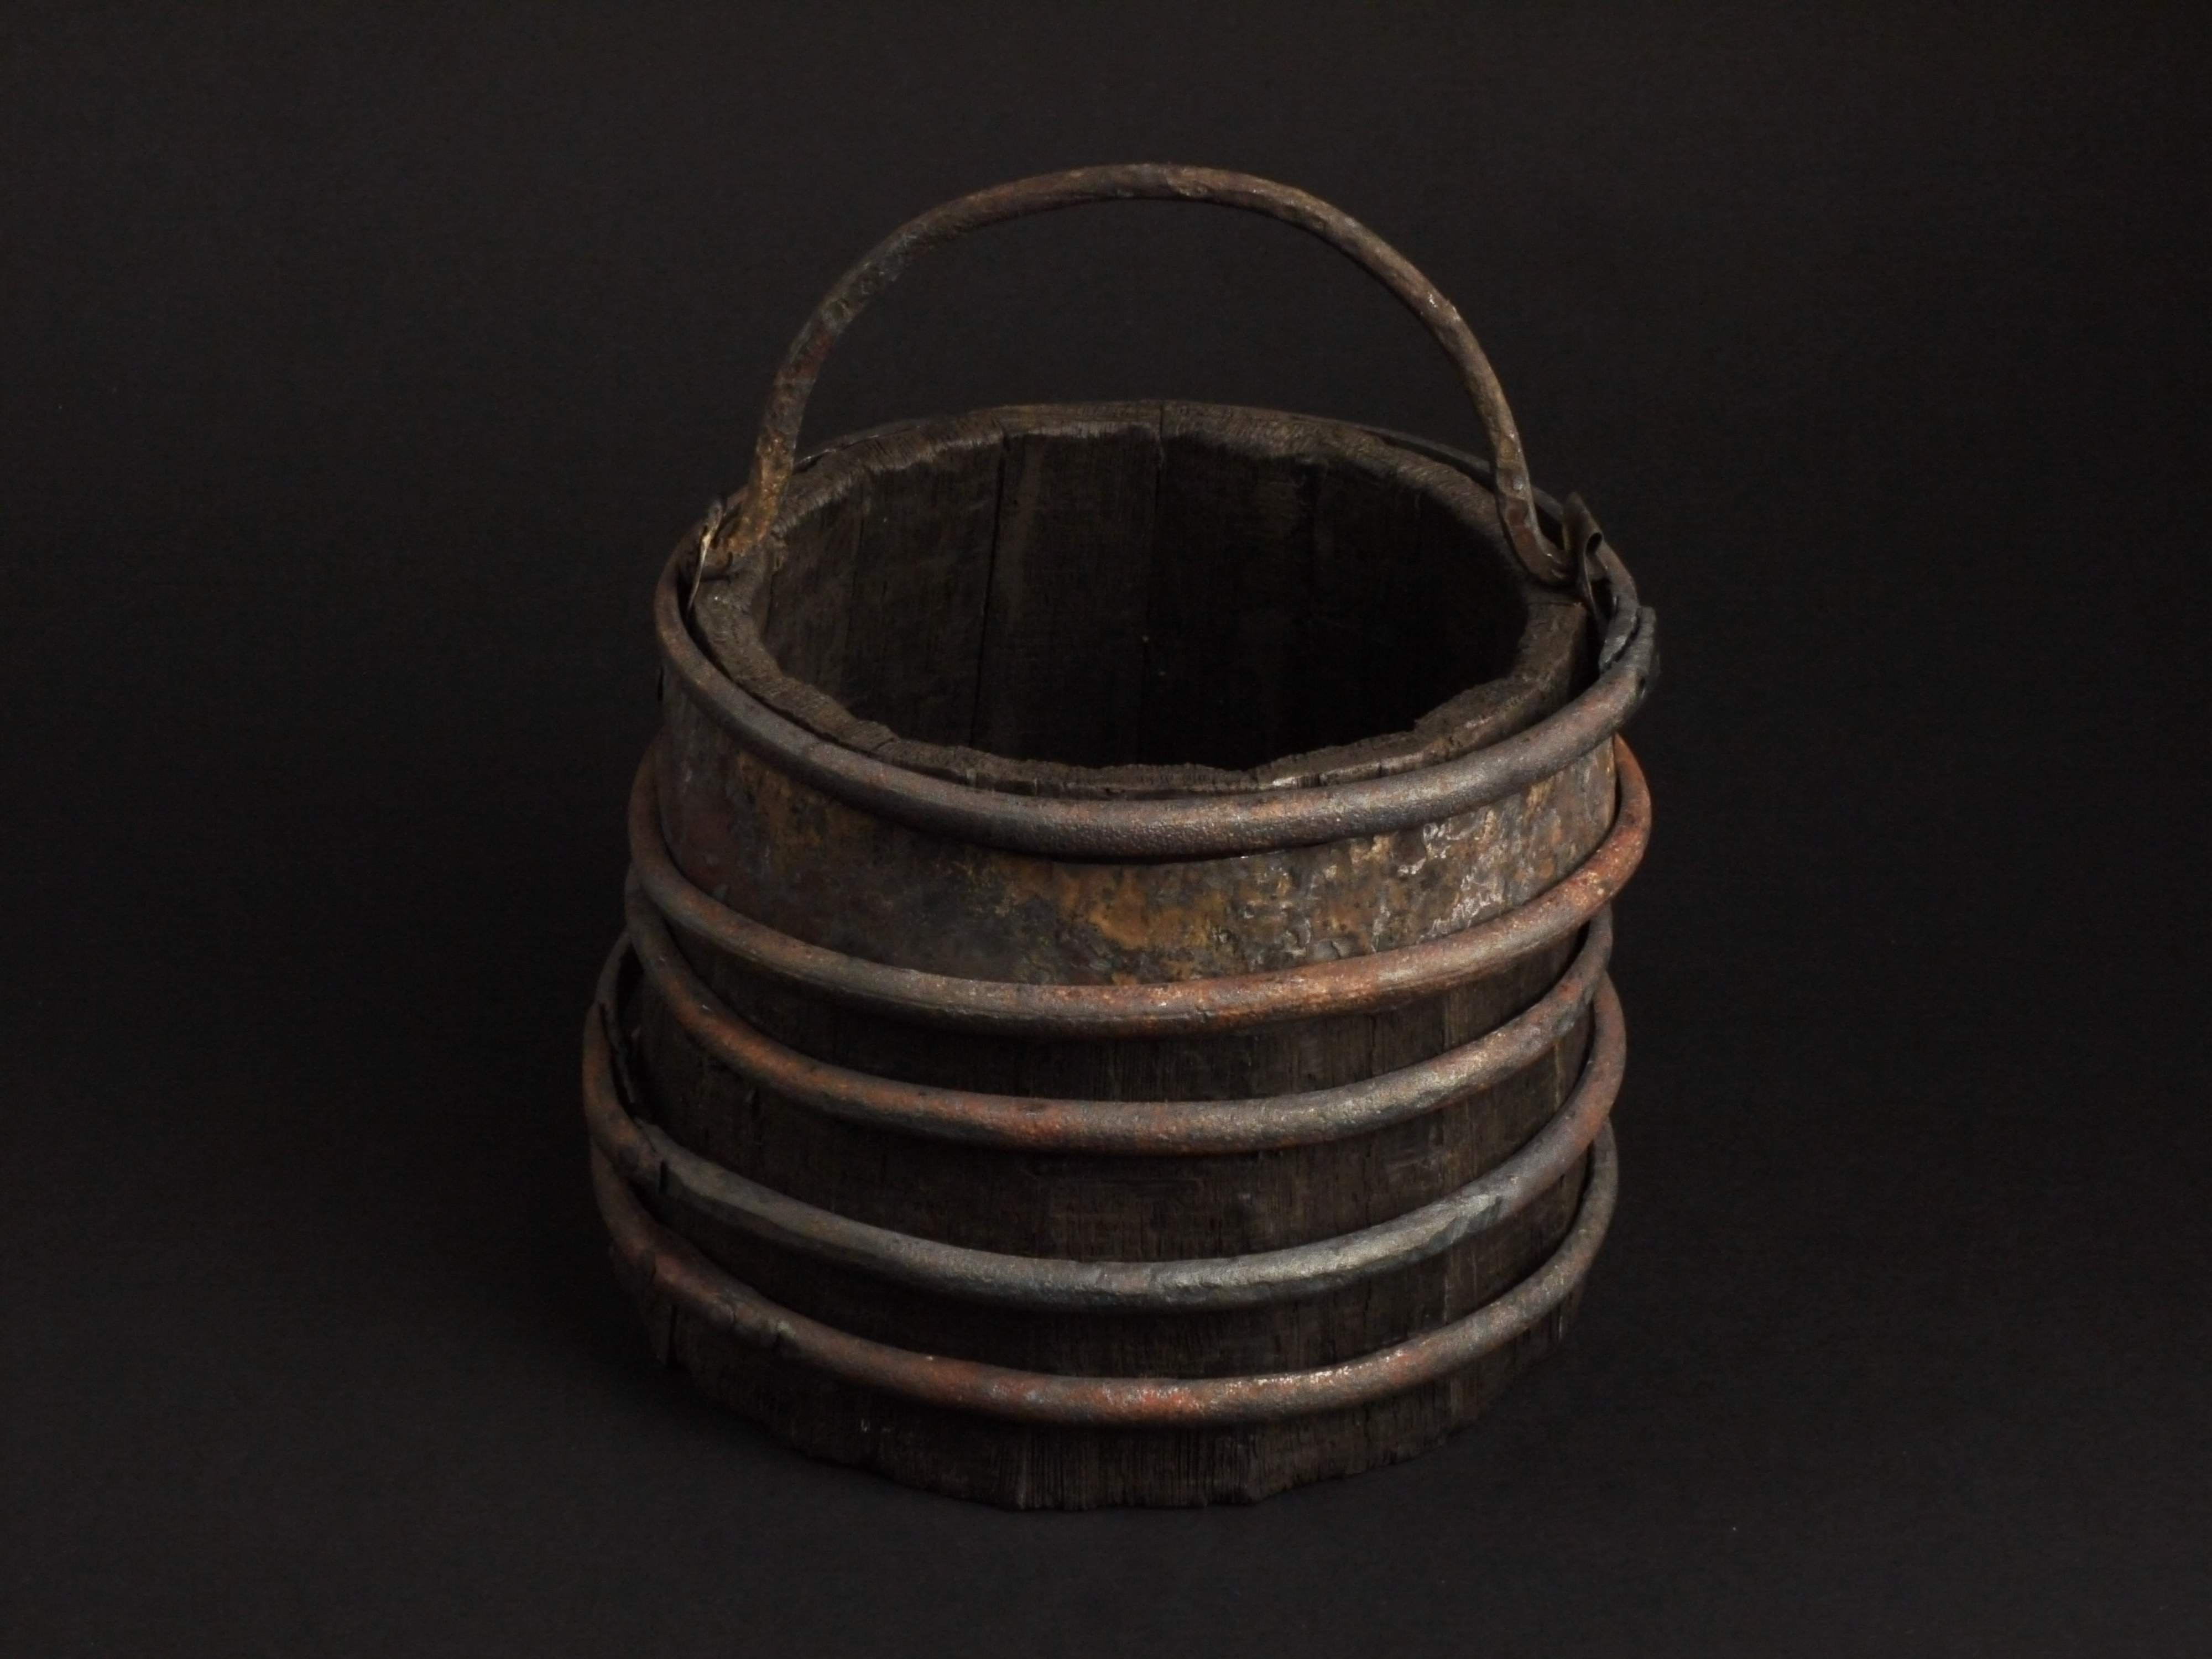 One artefact exhibition - stave buckets from Śródka